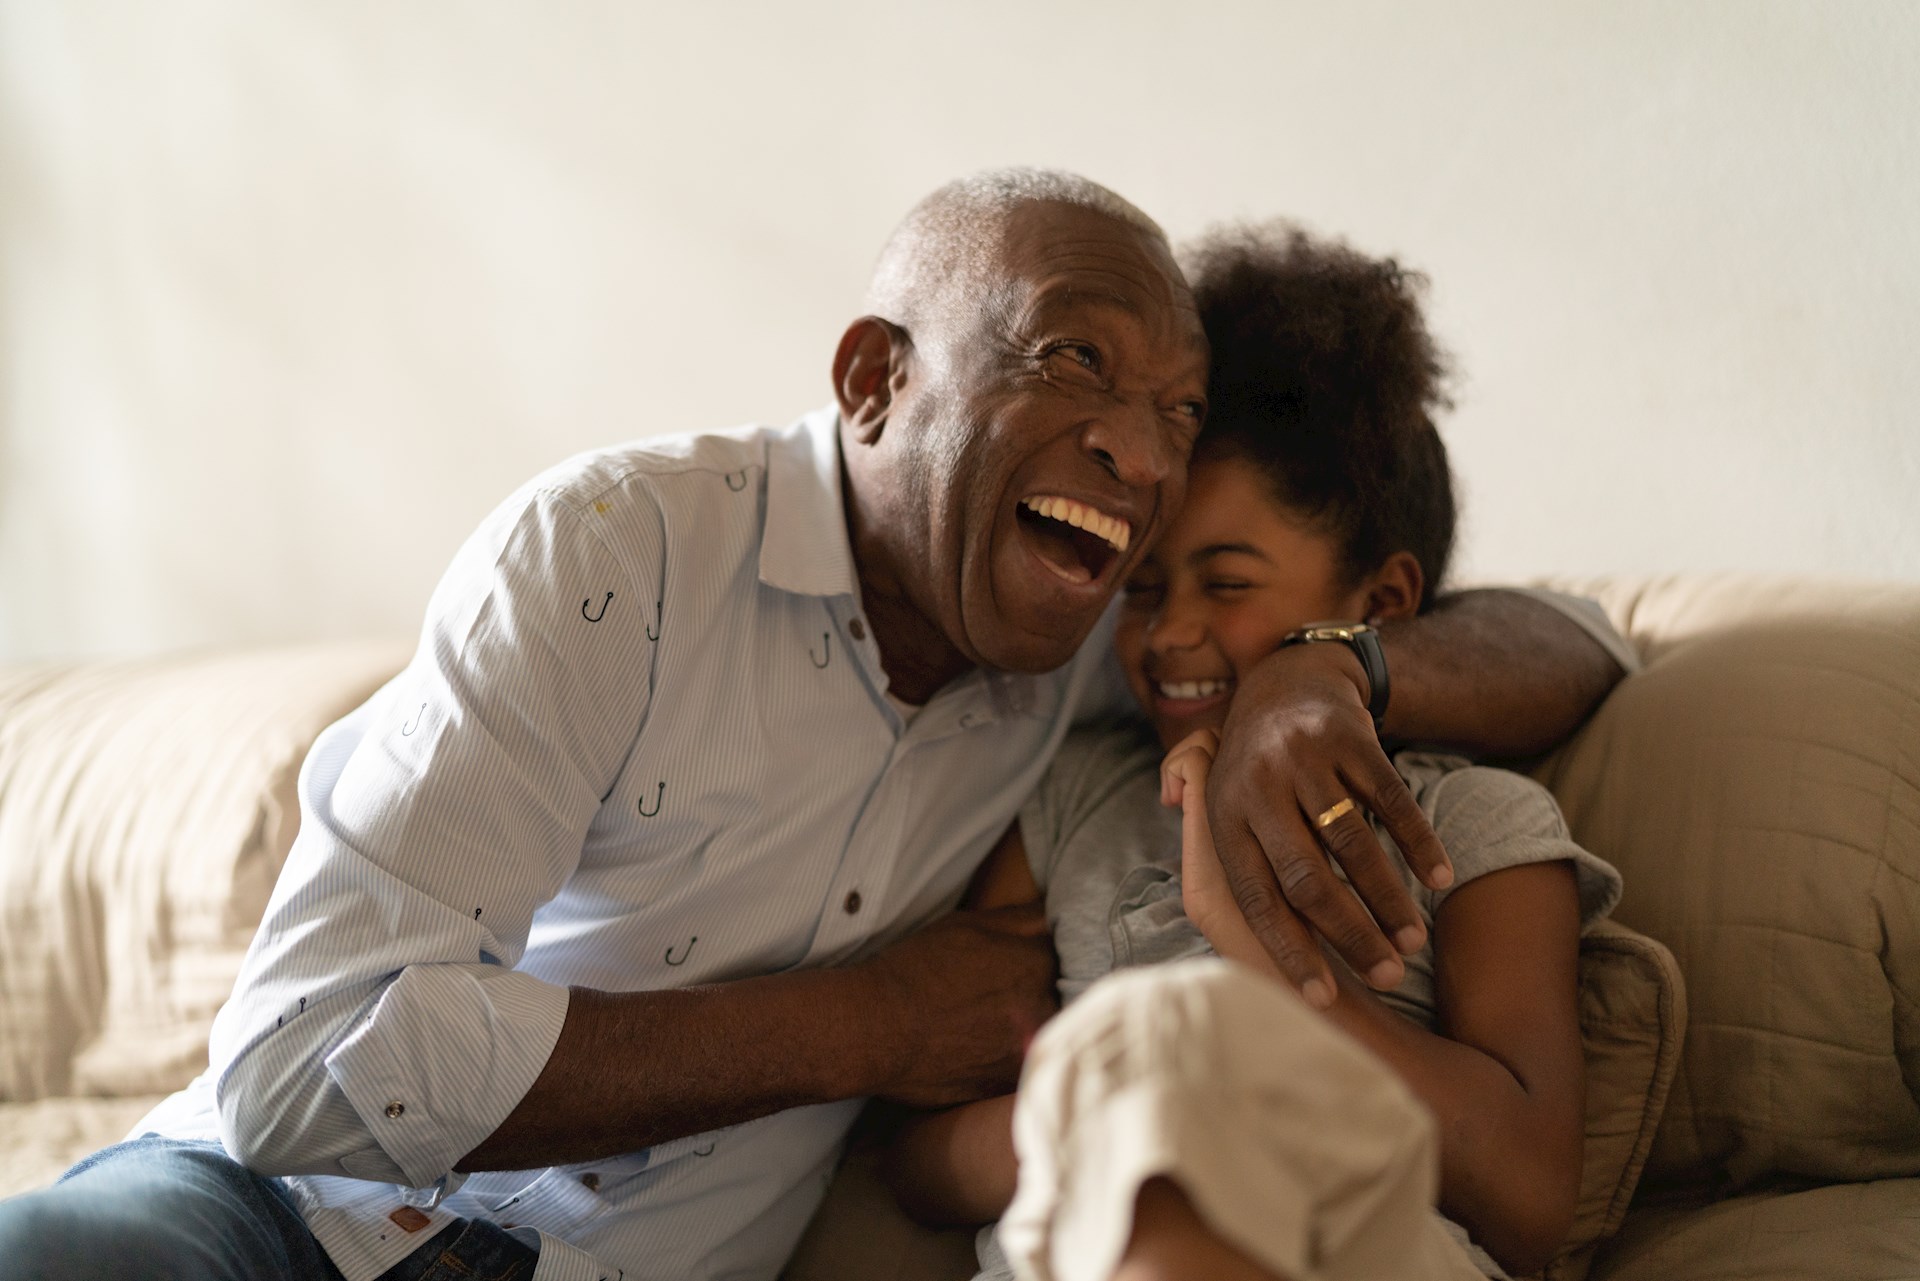 Under the new CDC guidelines, grandparents can see their grandchildren indoors, without masks, as long as the grandparents are fully vaccinated for COVID-19 and the grandchildren are not at risk of severe COVID-19.